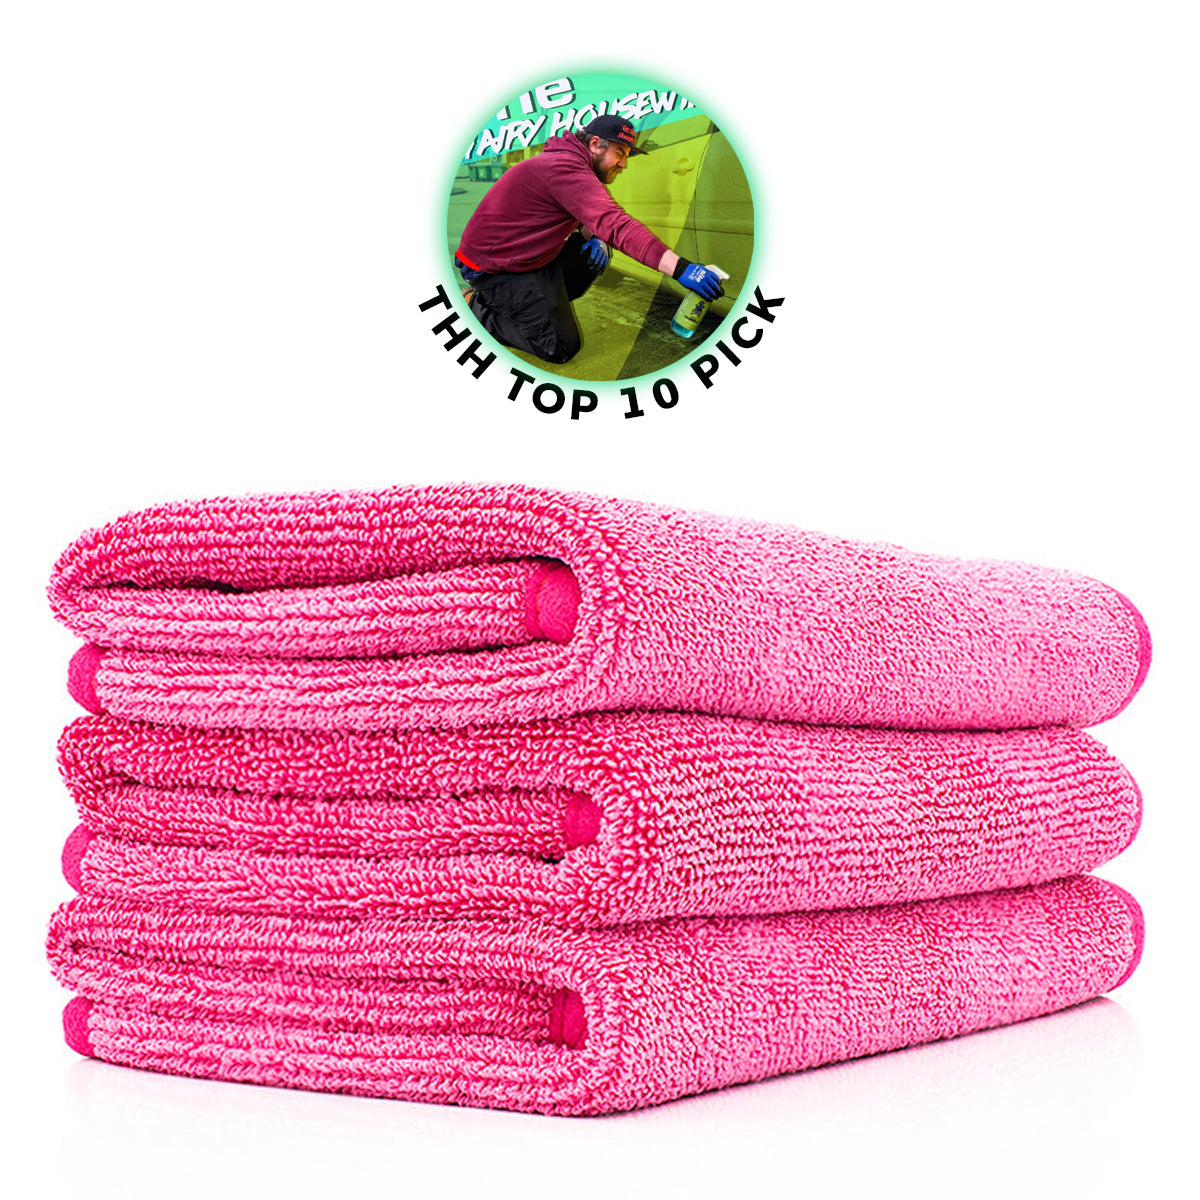 The Rag Company - Premium FTW Microfiber Cleaning Towels for Glass,  Windows, Mirrors, Polished Surfaces - Streak-Free, Scratchless, 16 x16”,  Pink